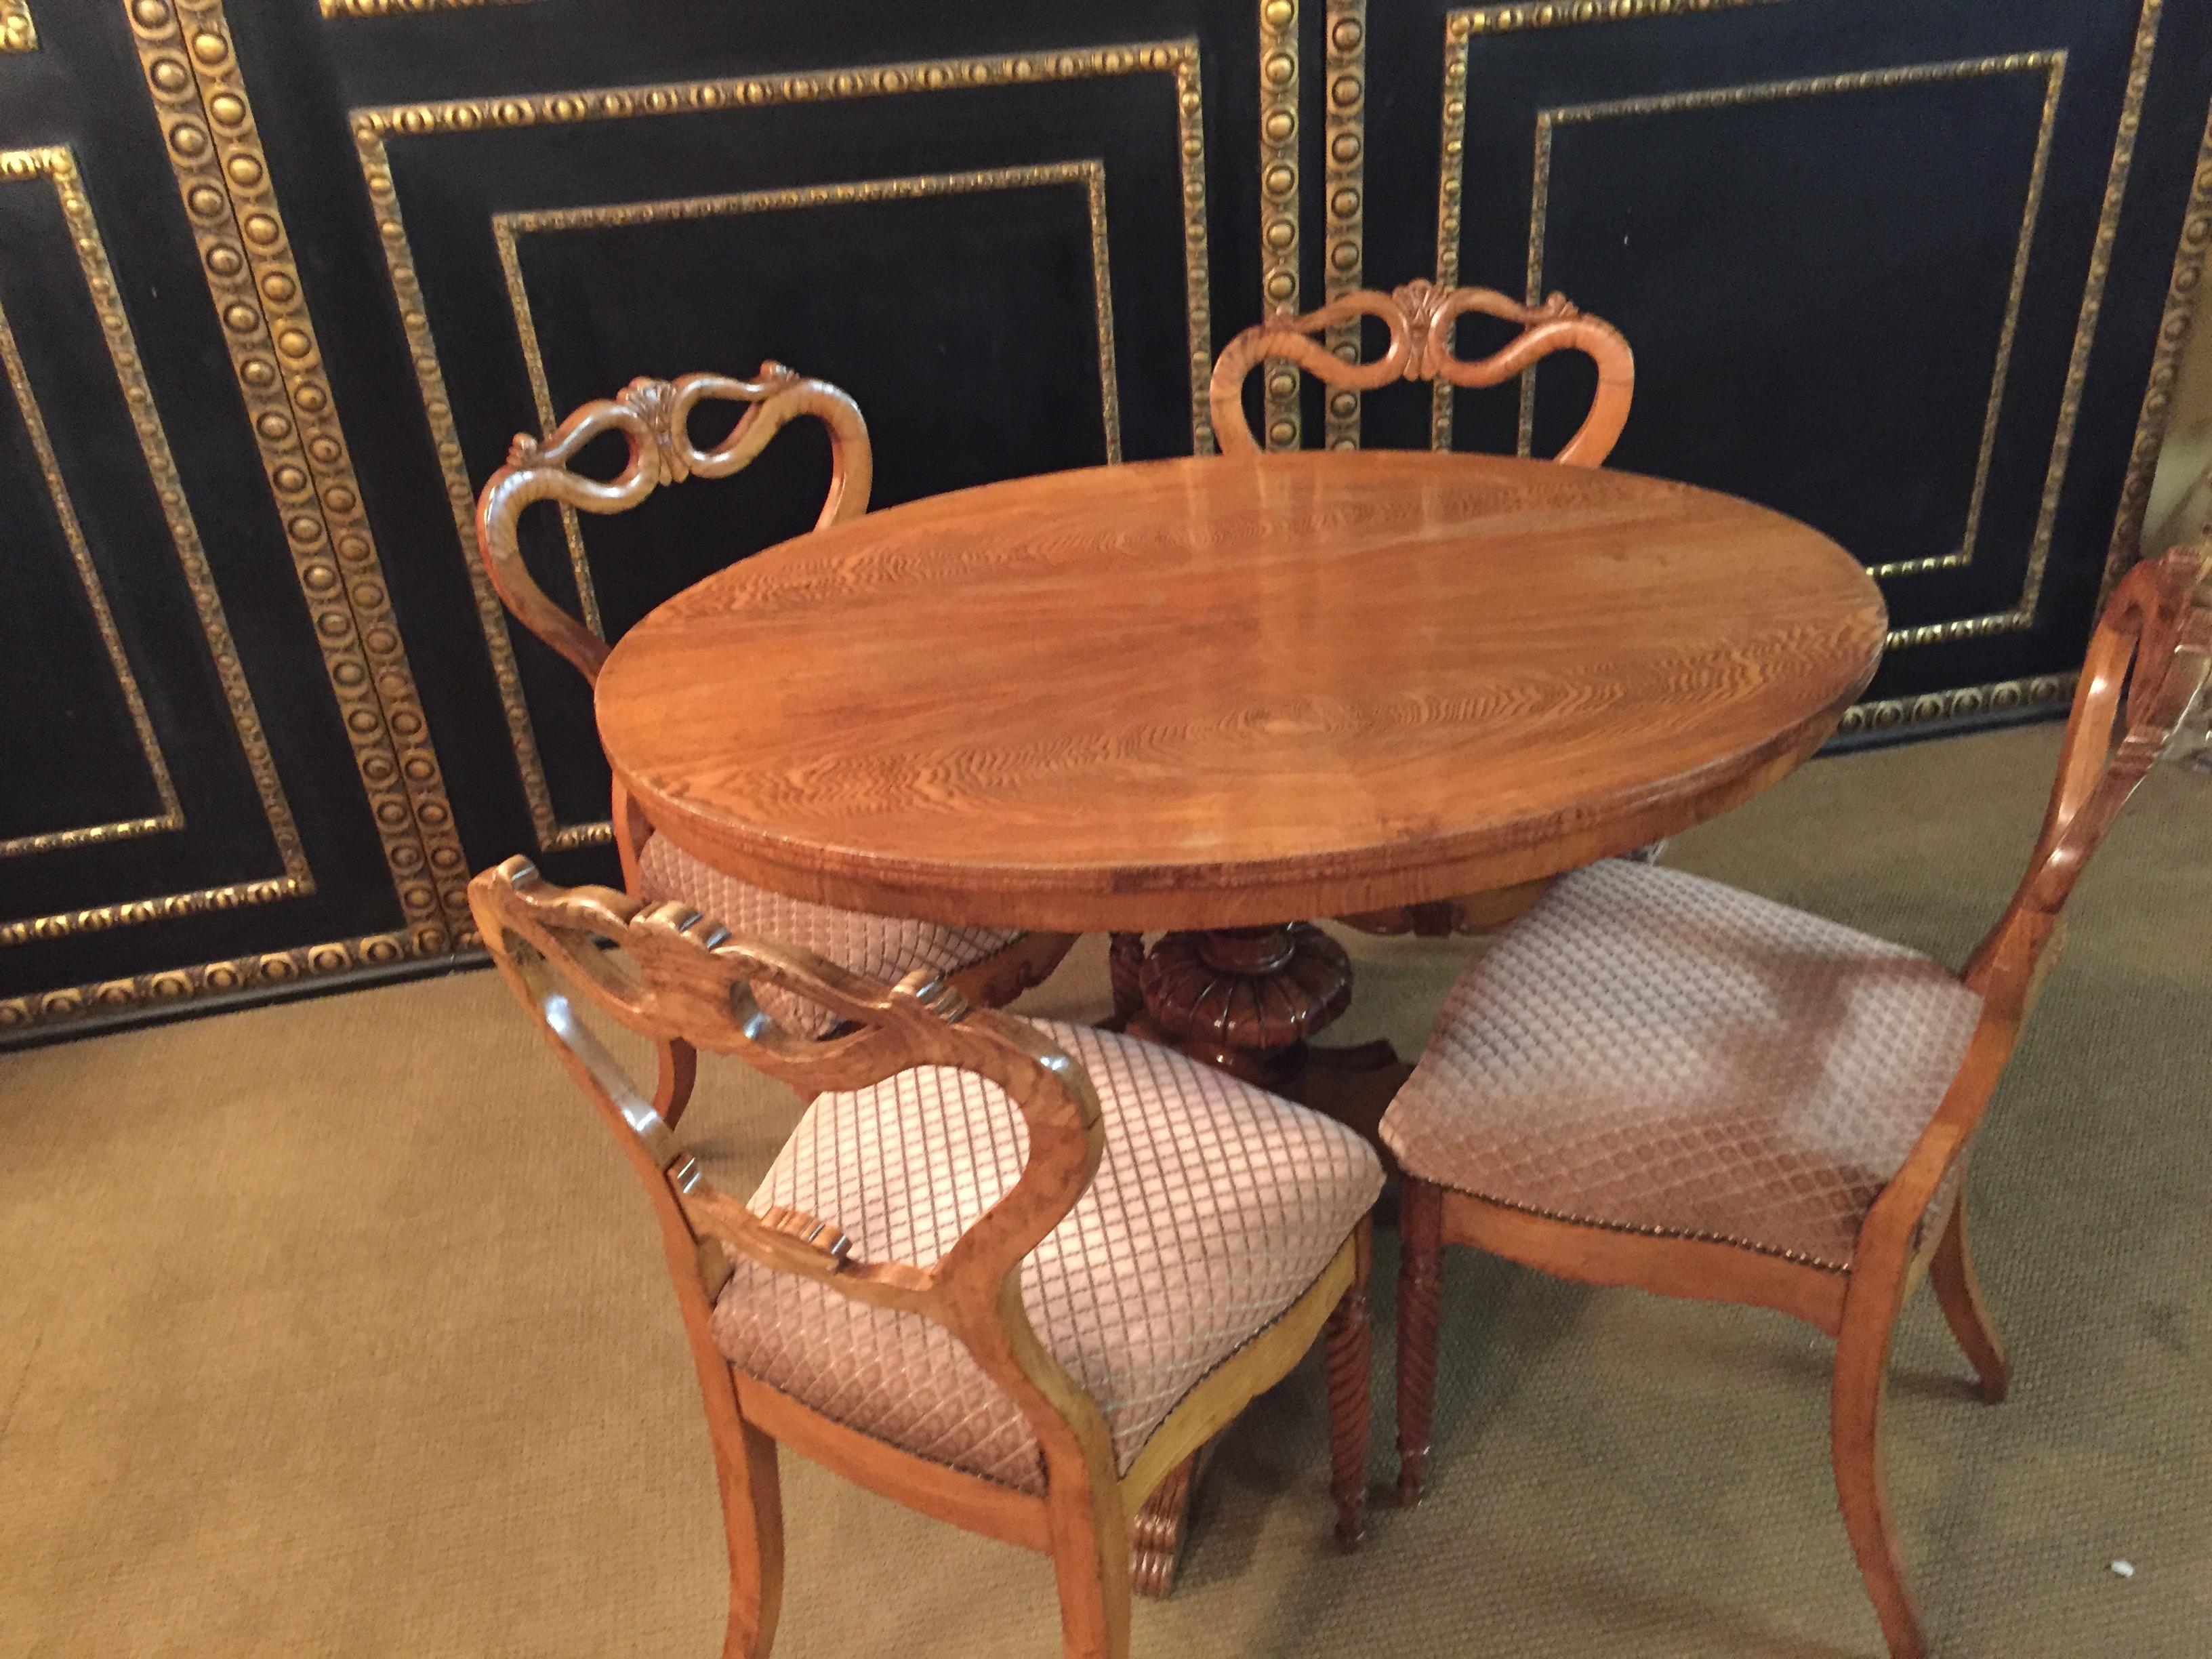 Beautiful dining table with 4 chairs original Biedermeier Ashwood,  around 1850.
Turned table with center column with 3 legs end in paw feet end.
Chairs at the front, the legs turned and curved at the back.
Backrest with beautiful ornaments.